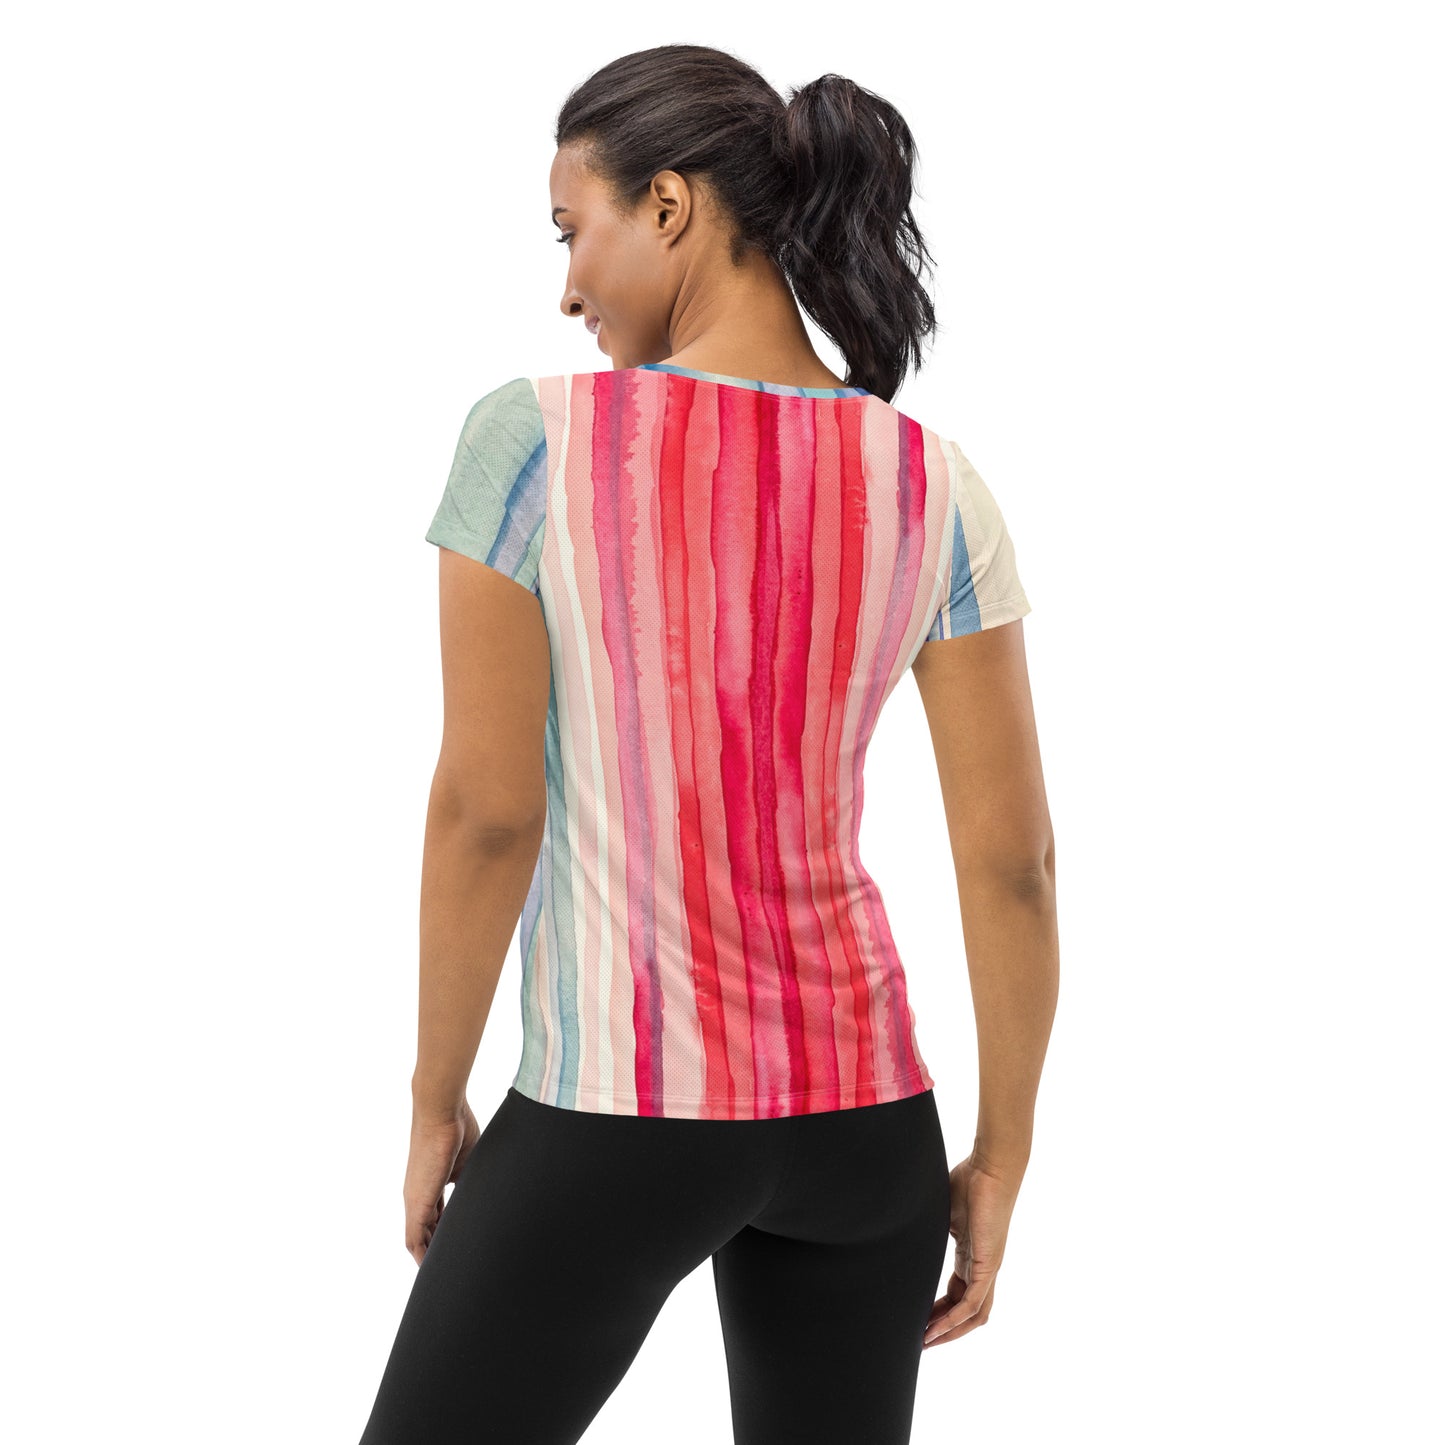 Climate Stripes All-Over Print Women's Athletic T-shirt